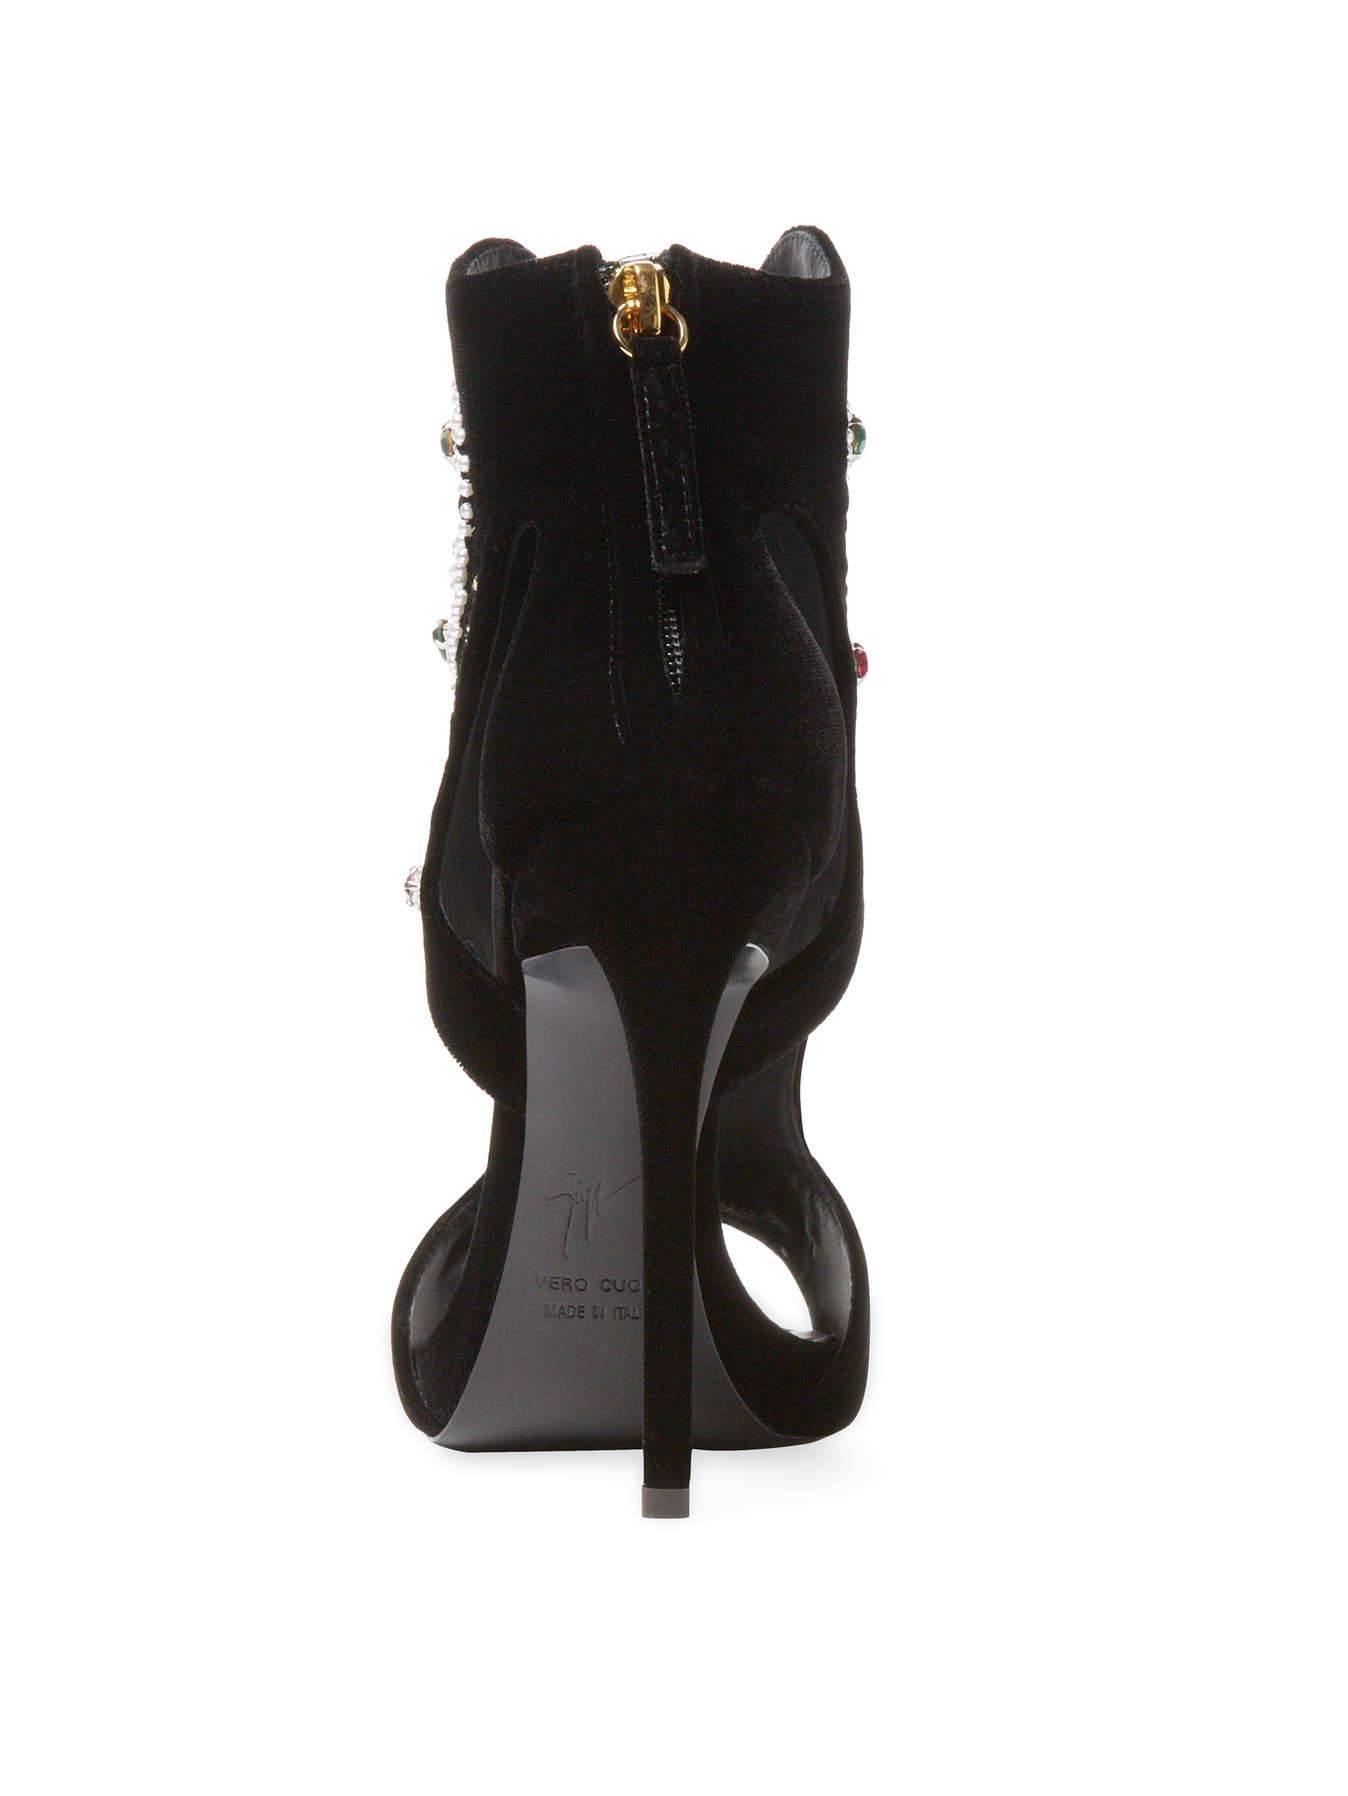 Giuseppe Zanotti NEW & SOLD OUT Black Embellished Bead Jewel Heels in Box 1